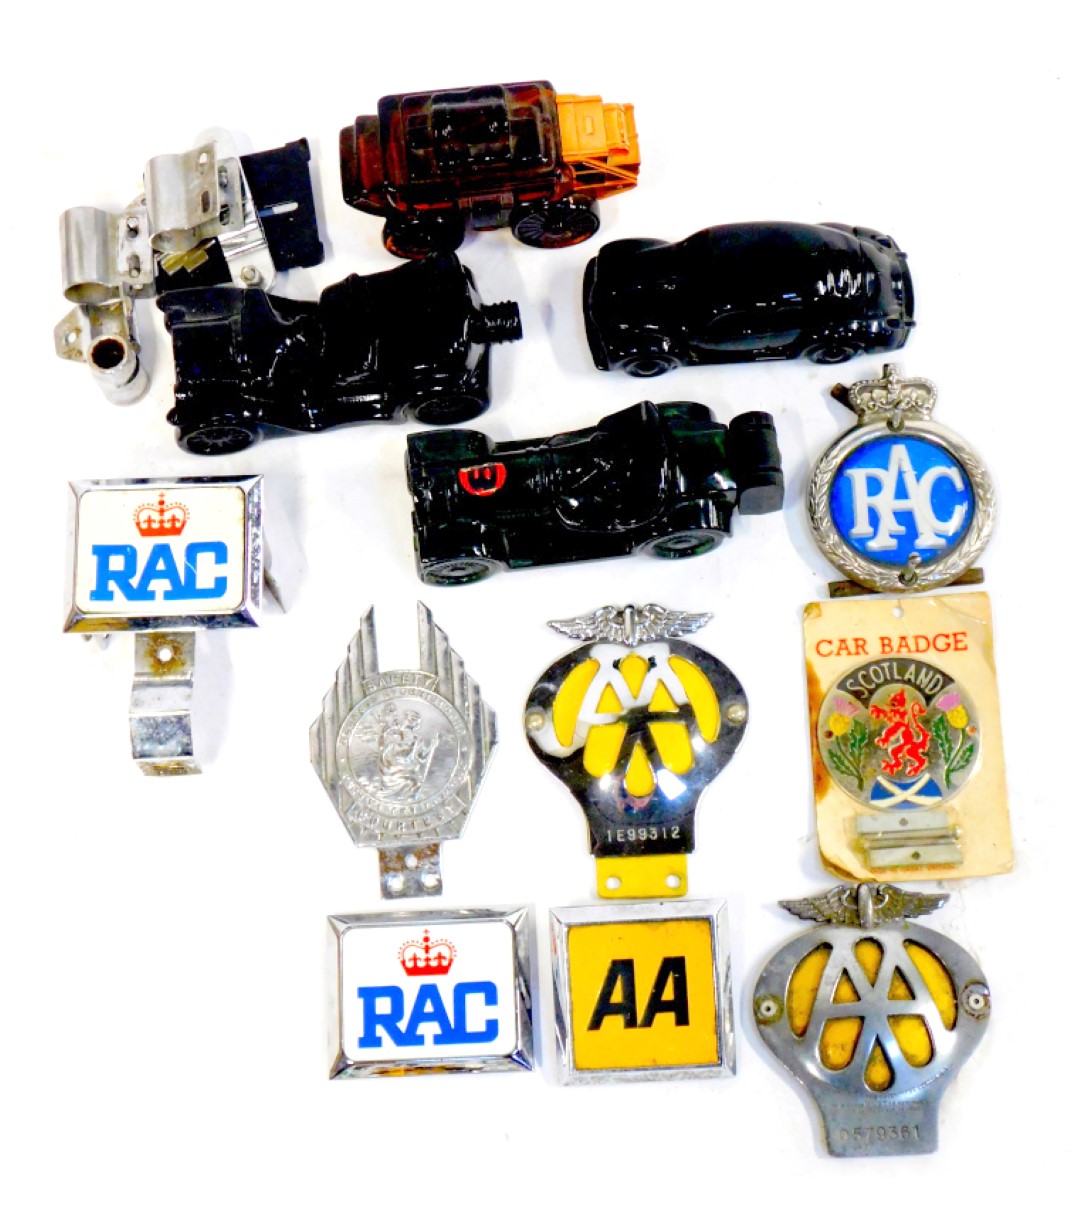 RAC and AA car badges, Avon collectors car scent bottles, etc. (1 tray)